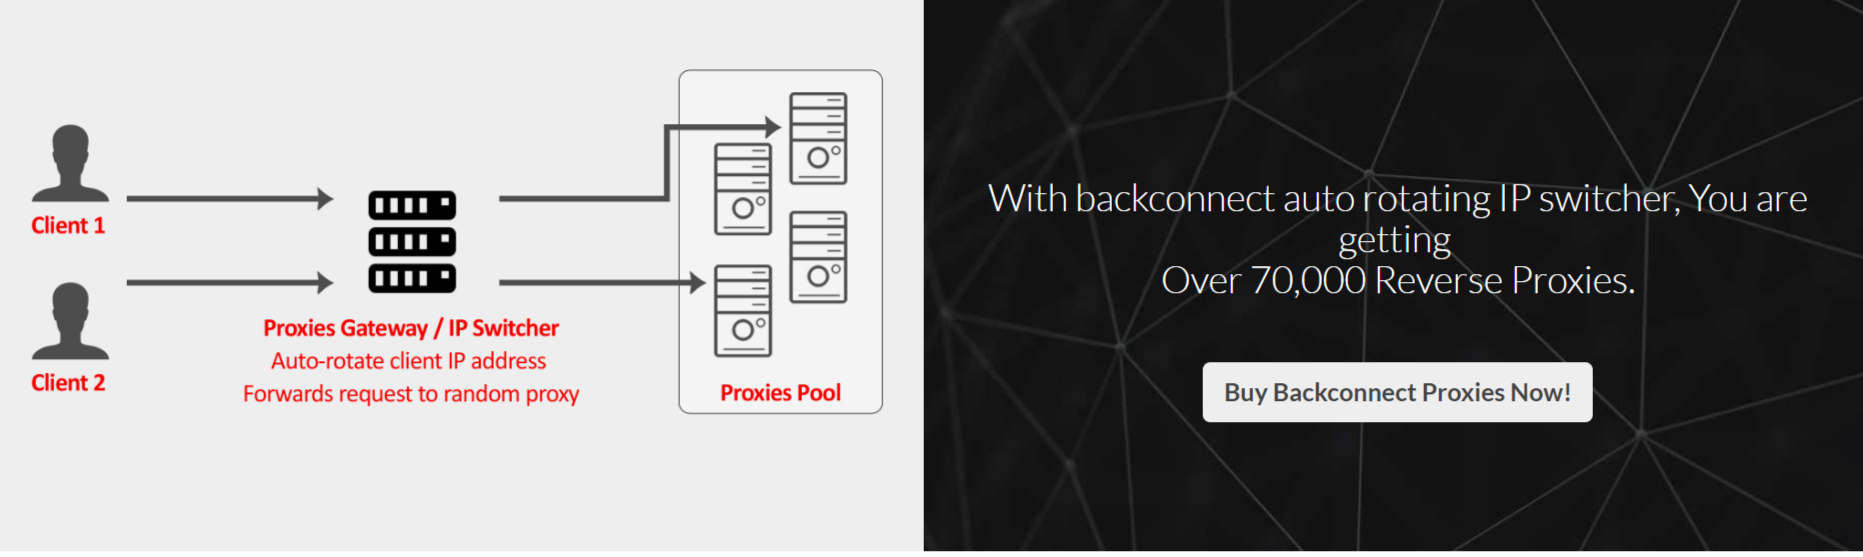 Backconnect Proxies- Best Backconnect Proxies